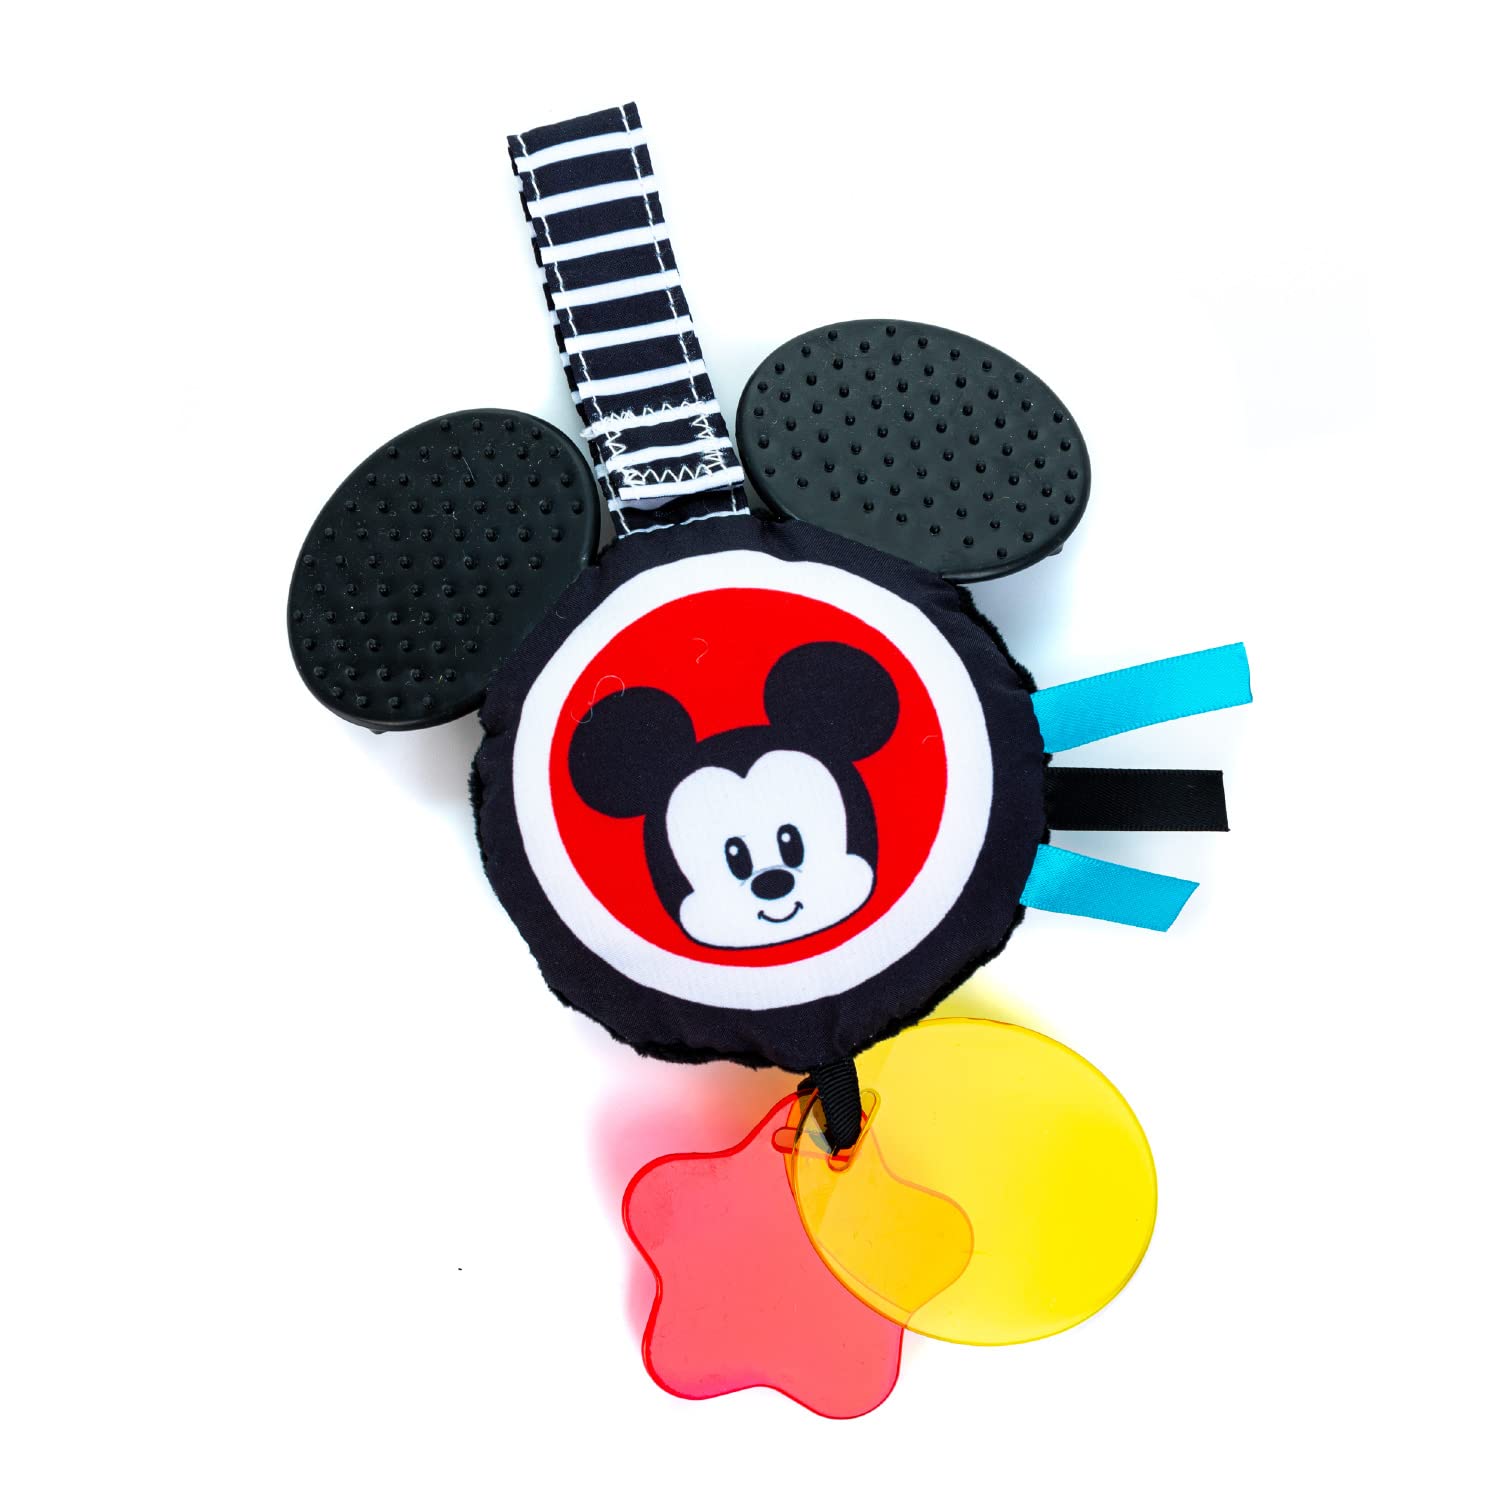 KIDS PREFERRED Disney Baby Mickey Mouse Hanging Toy, Black and White High Contrast Crinkle Plush, Boys and Girls Ages 0+, Stroller On The Go Activity Toy (81246)